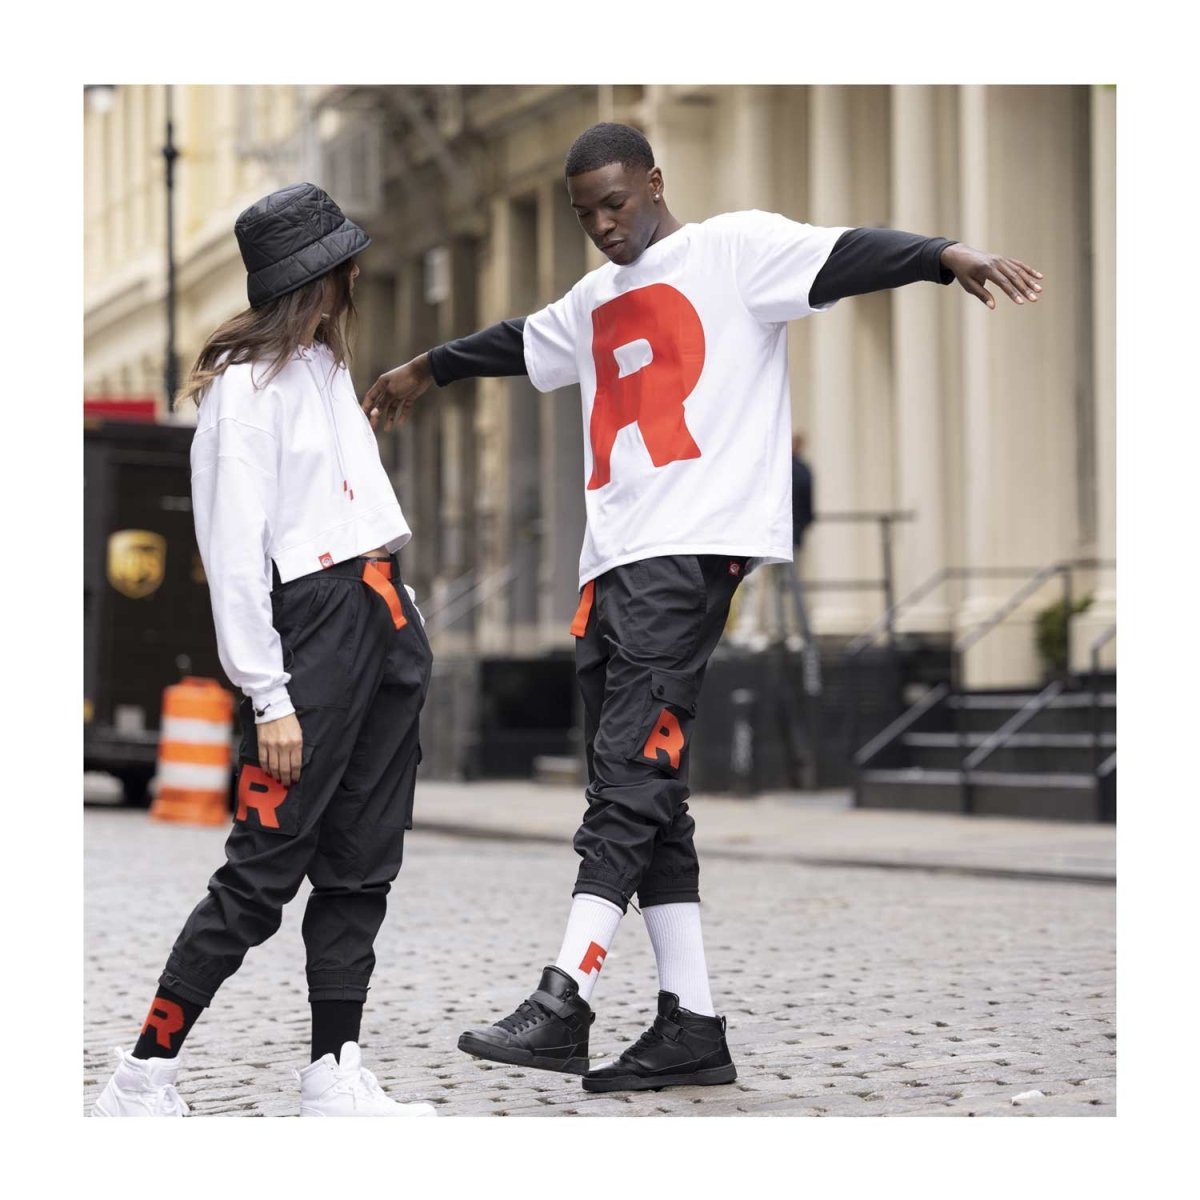 Team Rocket HQ Collection Black Relaxed Fit Utility Jogger Pants - Adult